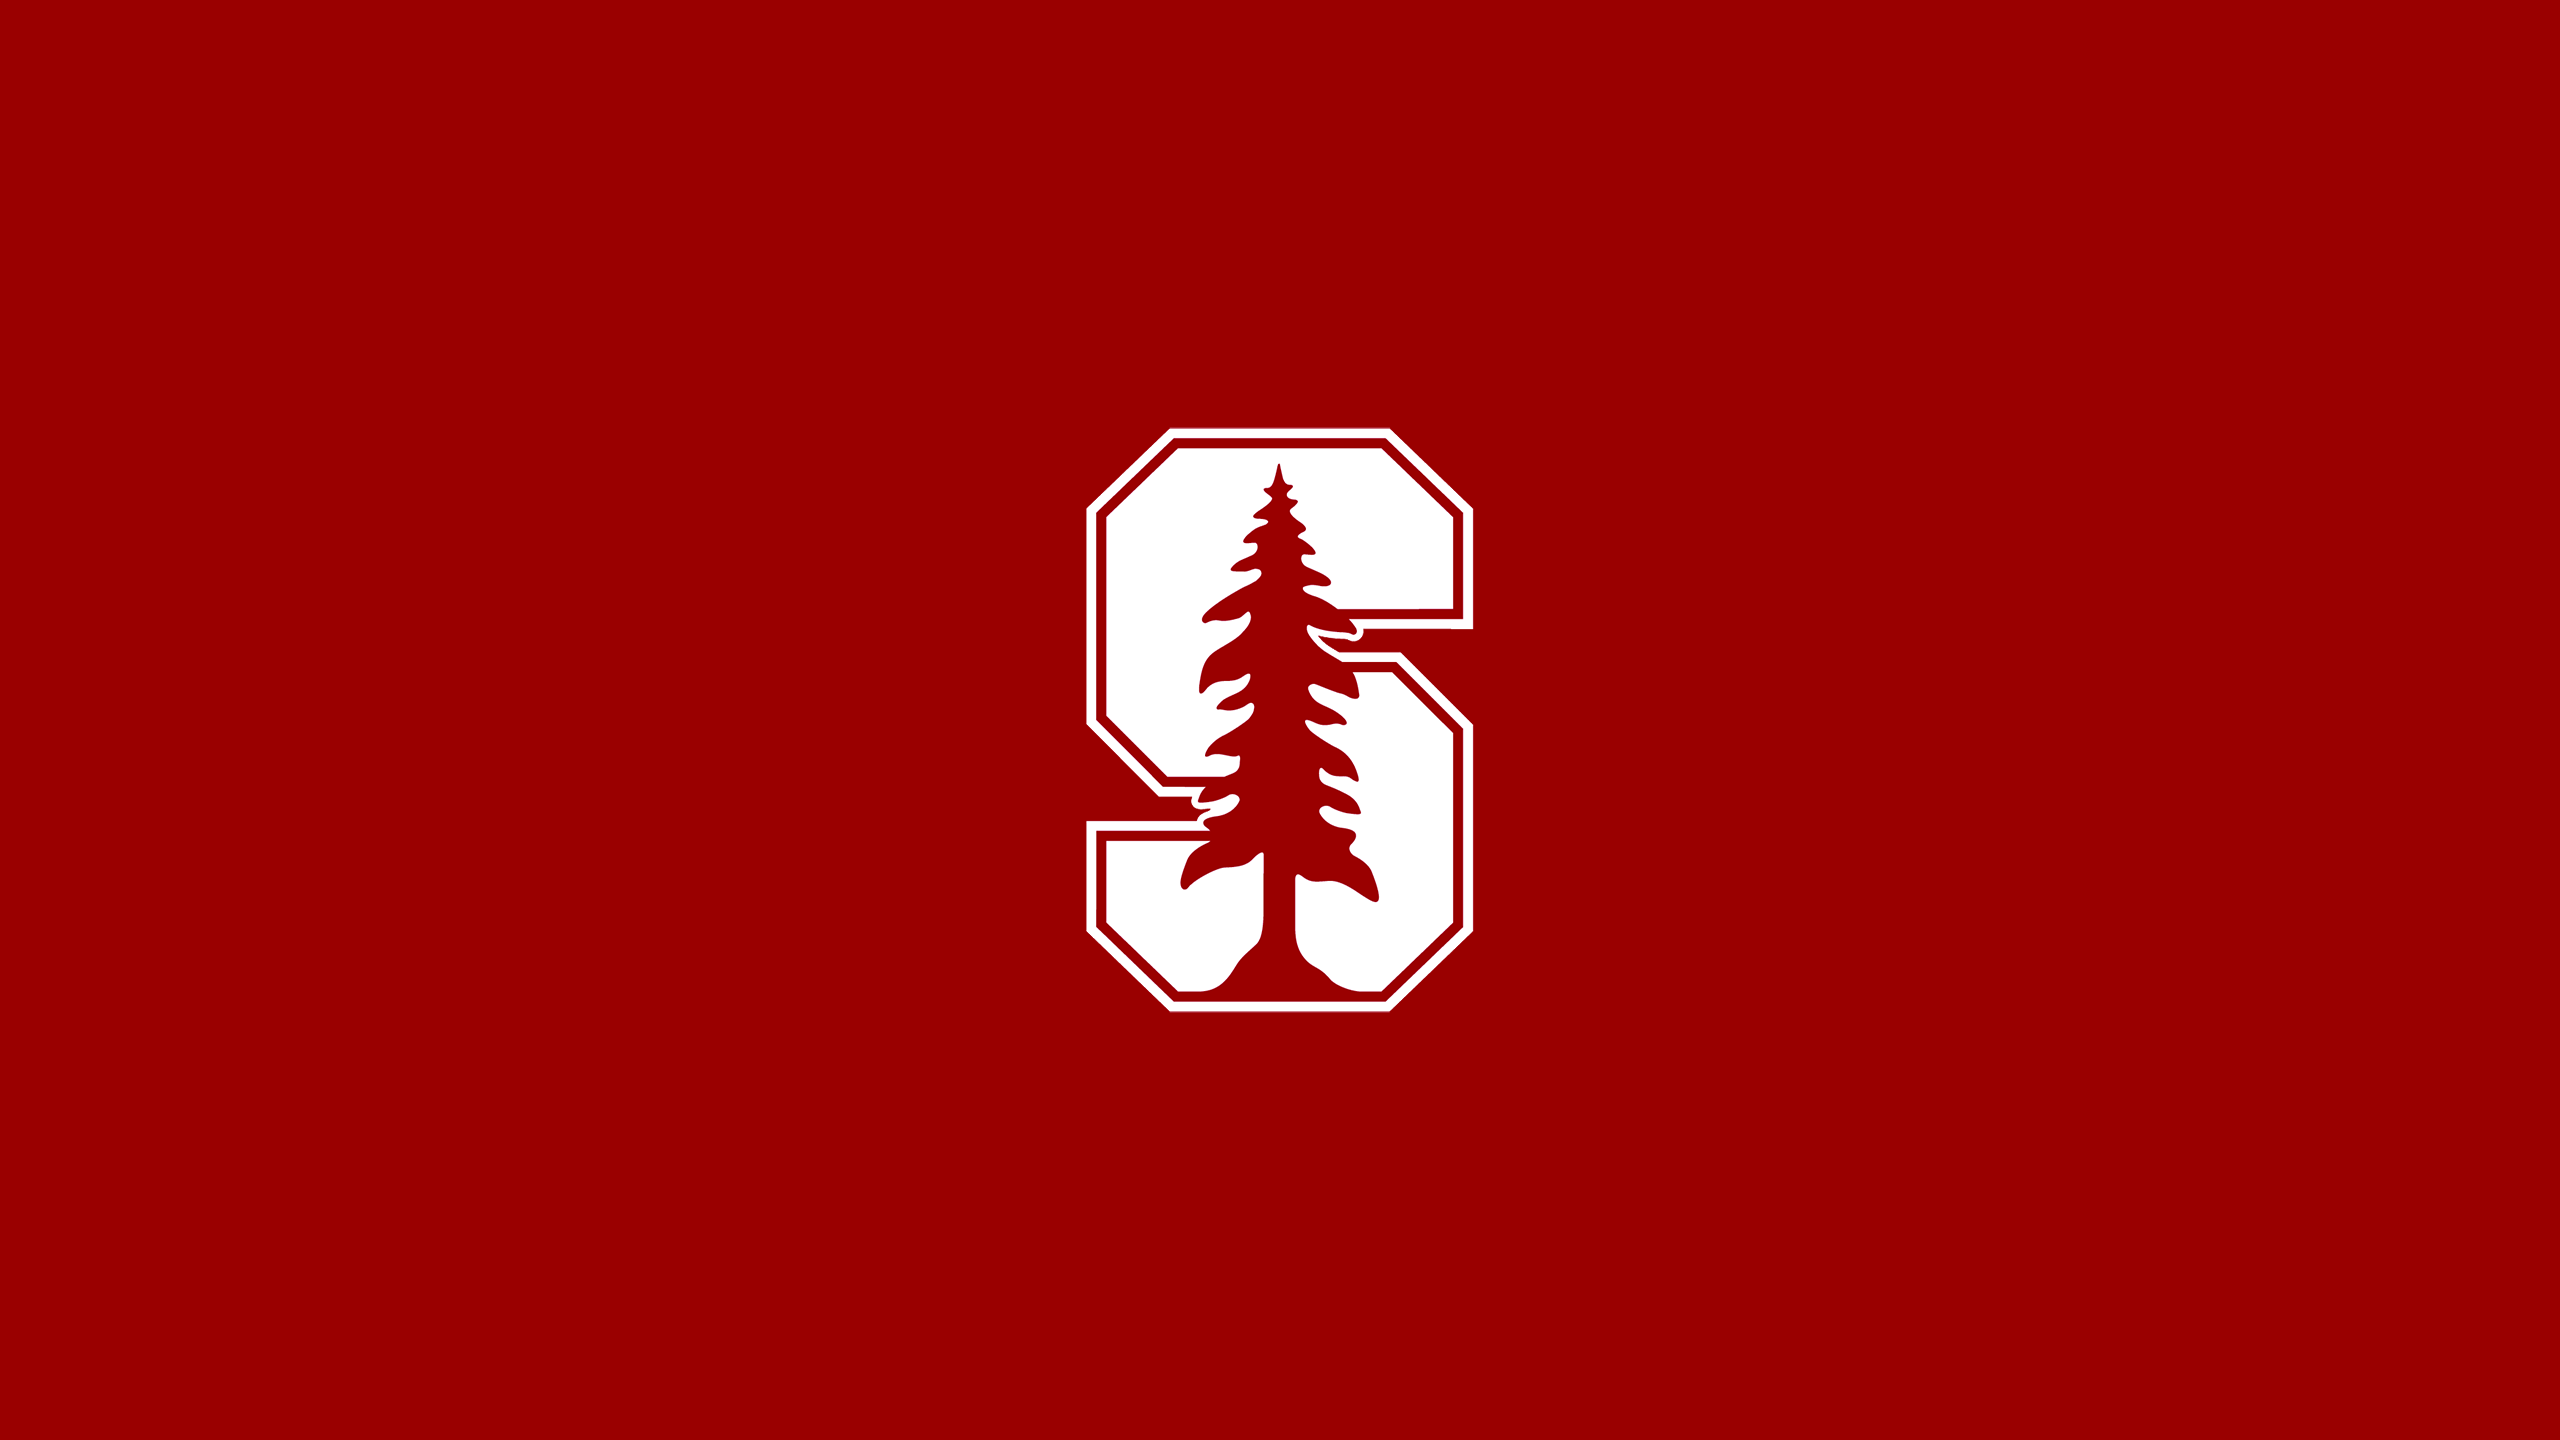 Stanford Cardinal - NCAAF - Square Bettor